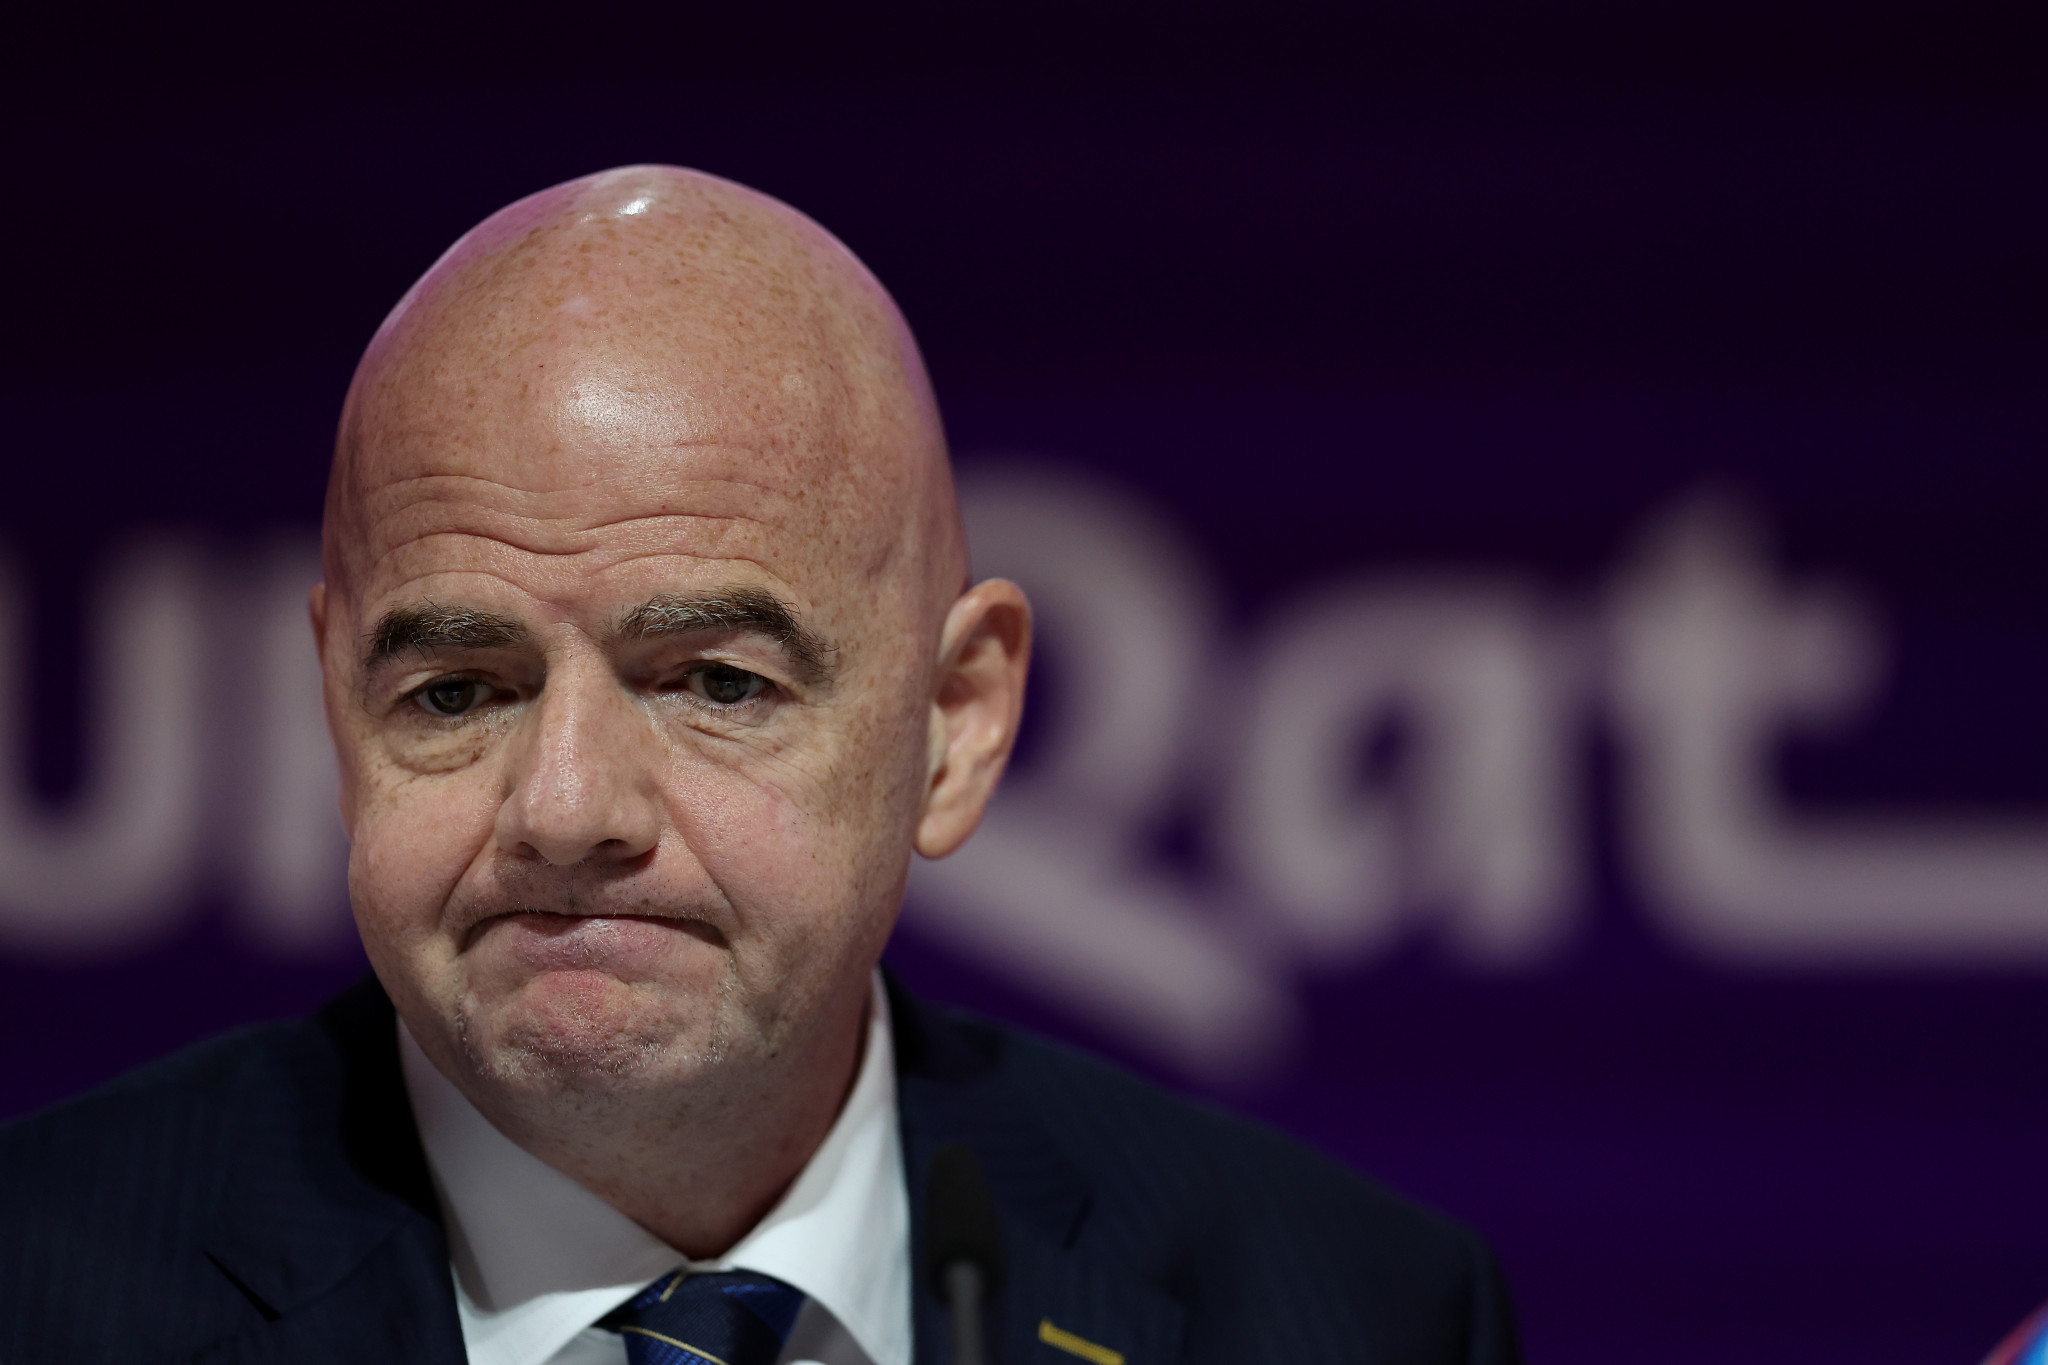 FIFA President Gianni Infantino has attracted widespread condemnation for his speech on the eve of Qatar 2022 ©Getty Images